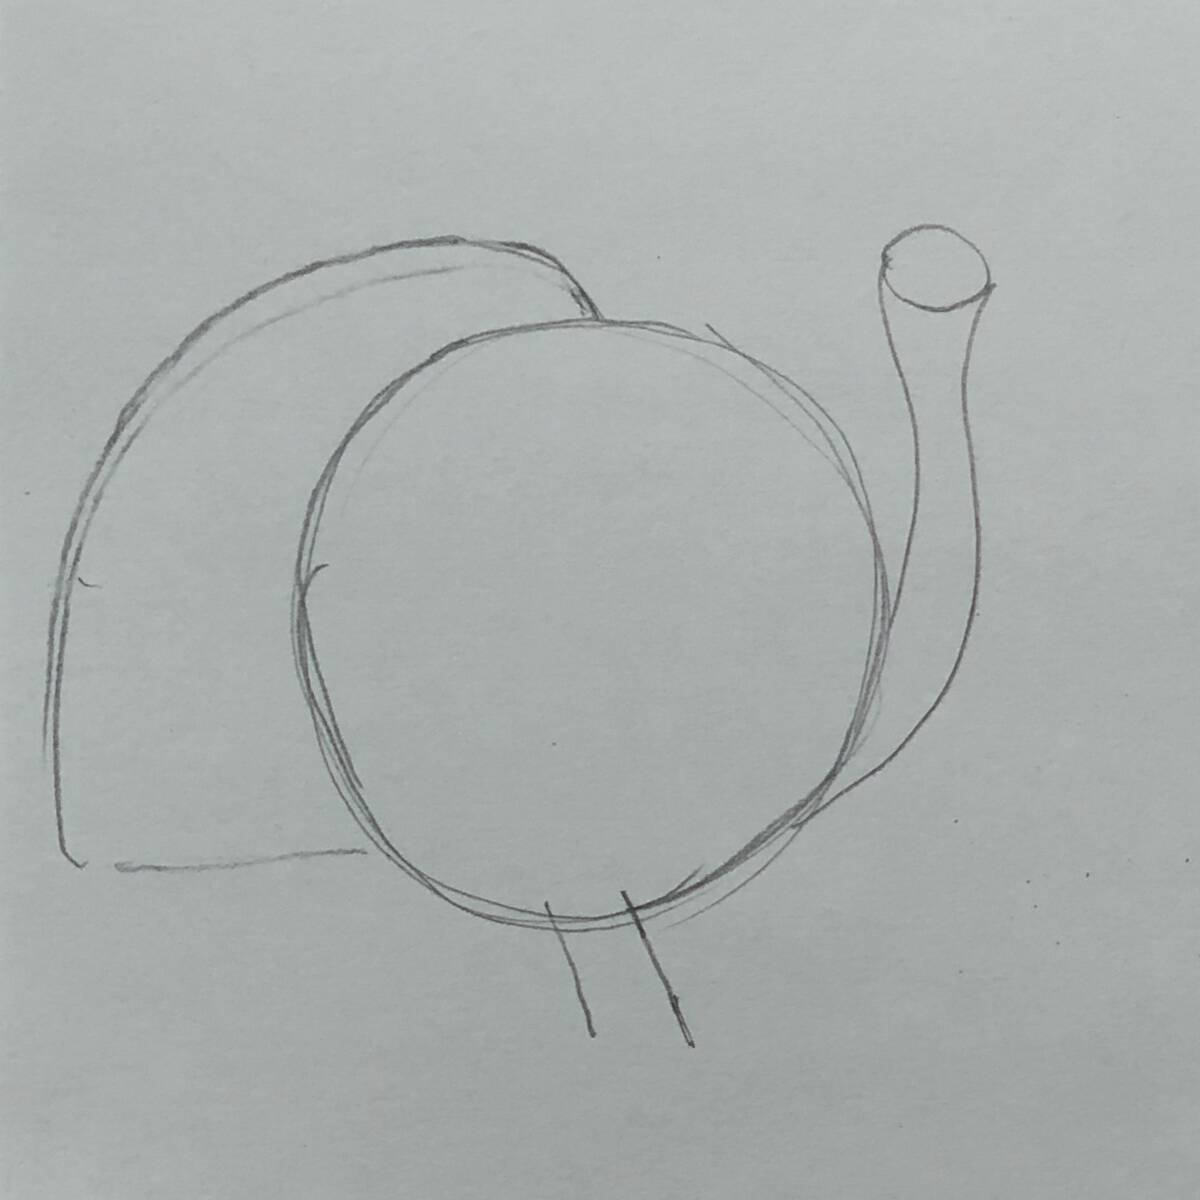 Beginning line-drawing  sketch of a turkey, one large circle for the body and a small circle for the head, joined by a neck with a fan-shaped tail.